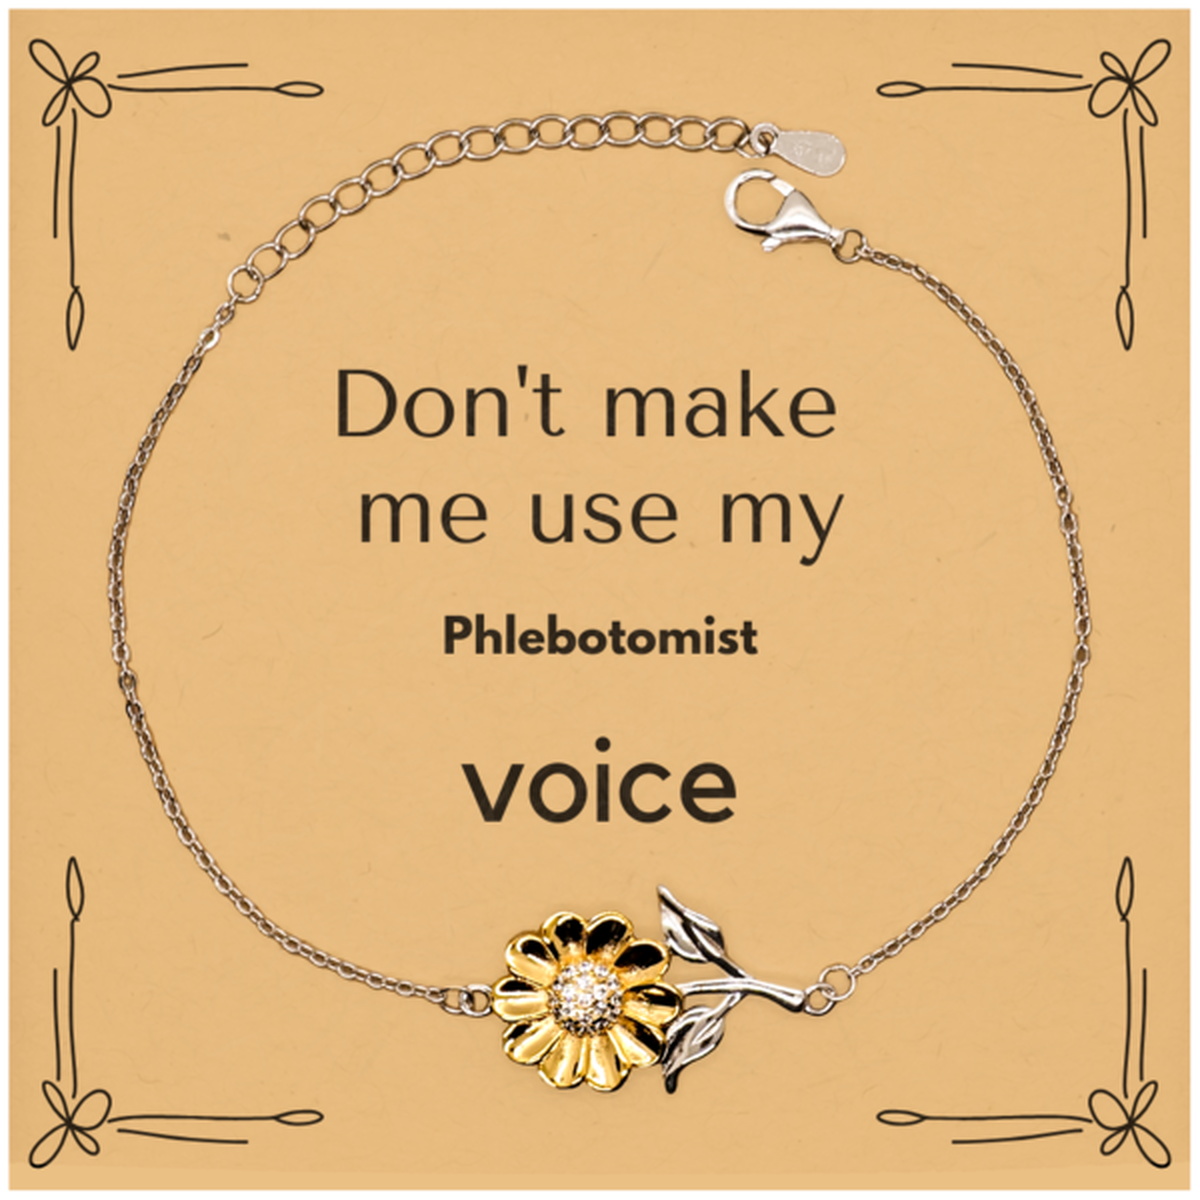 Don't make me use my Phlebotomist voice, Sarcasm Phlebotomist Card Gifts, Christmas Phlebotomist Sunflower Bracelet Birthday Unique Gifts For Phlebotomist Coworkers, Men, Women, Colleague, Friends